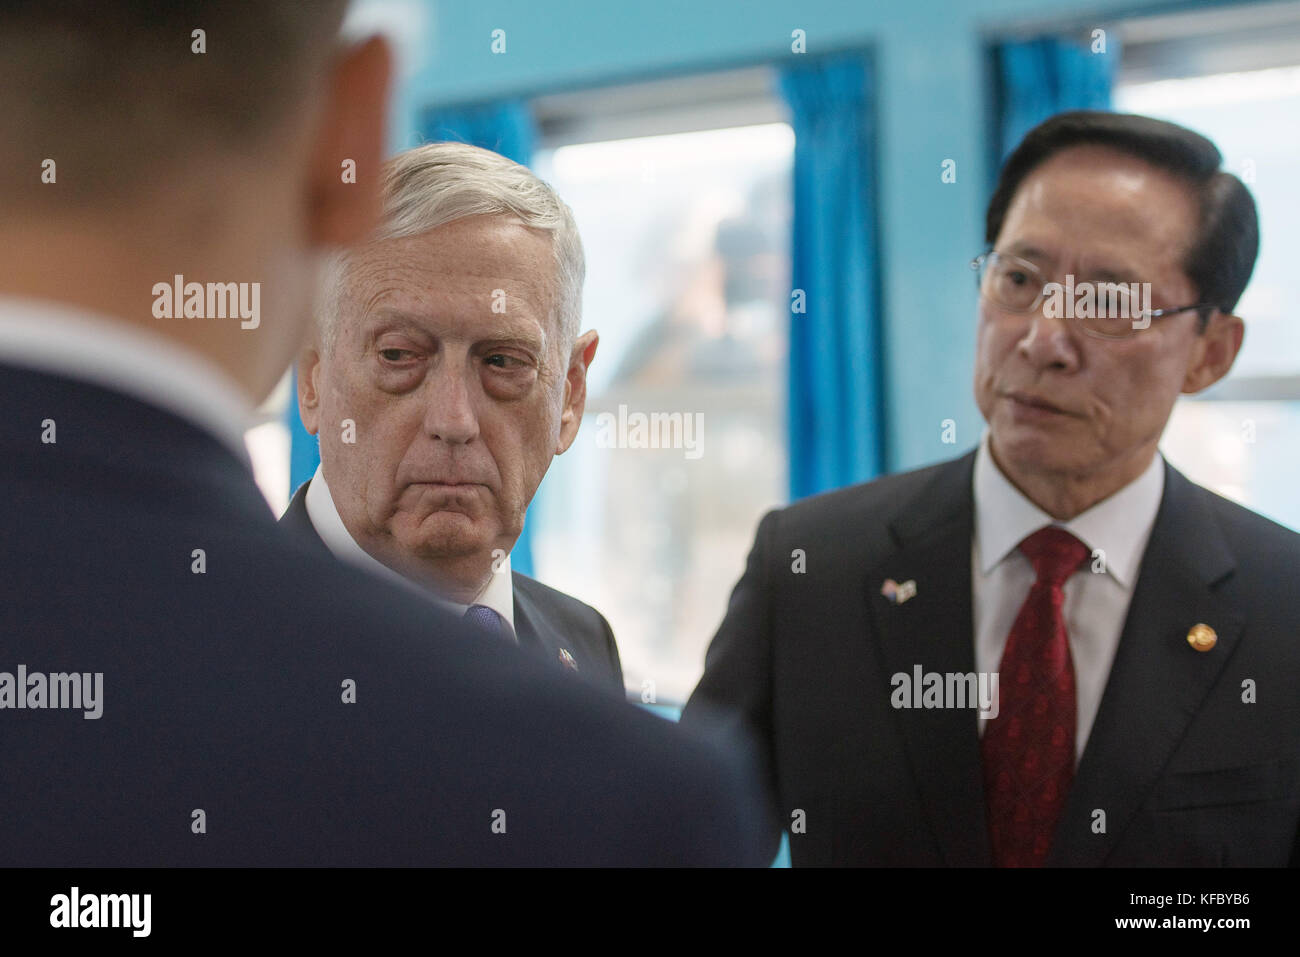 U.S. Secretary of Defense Jim Mattis and South Korean Defense Minister Song Young-moo receive a briefing inside the truce village during a surprise visit to the Demilitarized Zone between North and South Korea October 27, 2017 in Panmunjom, South Korea. Stock Photo